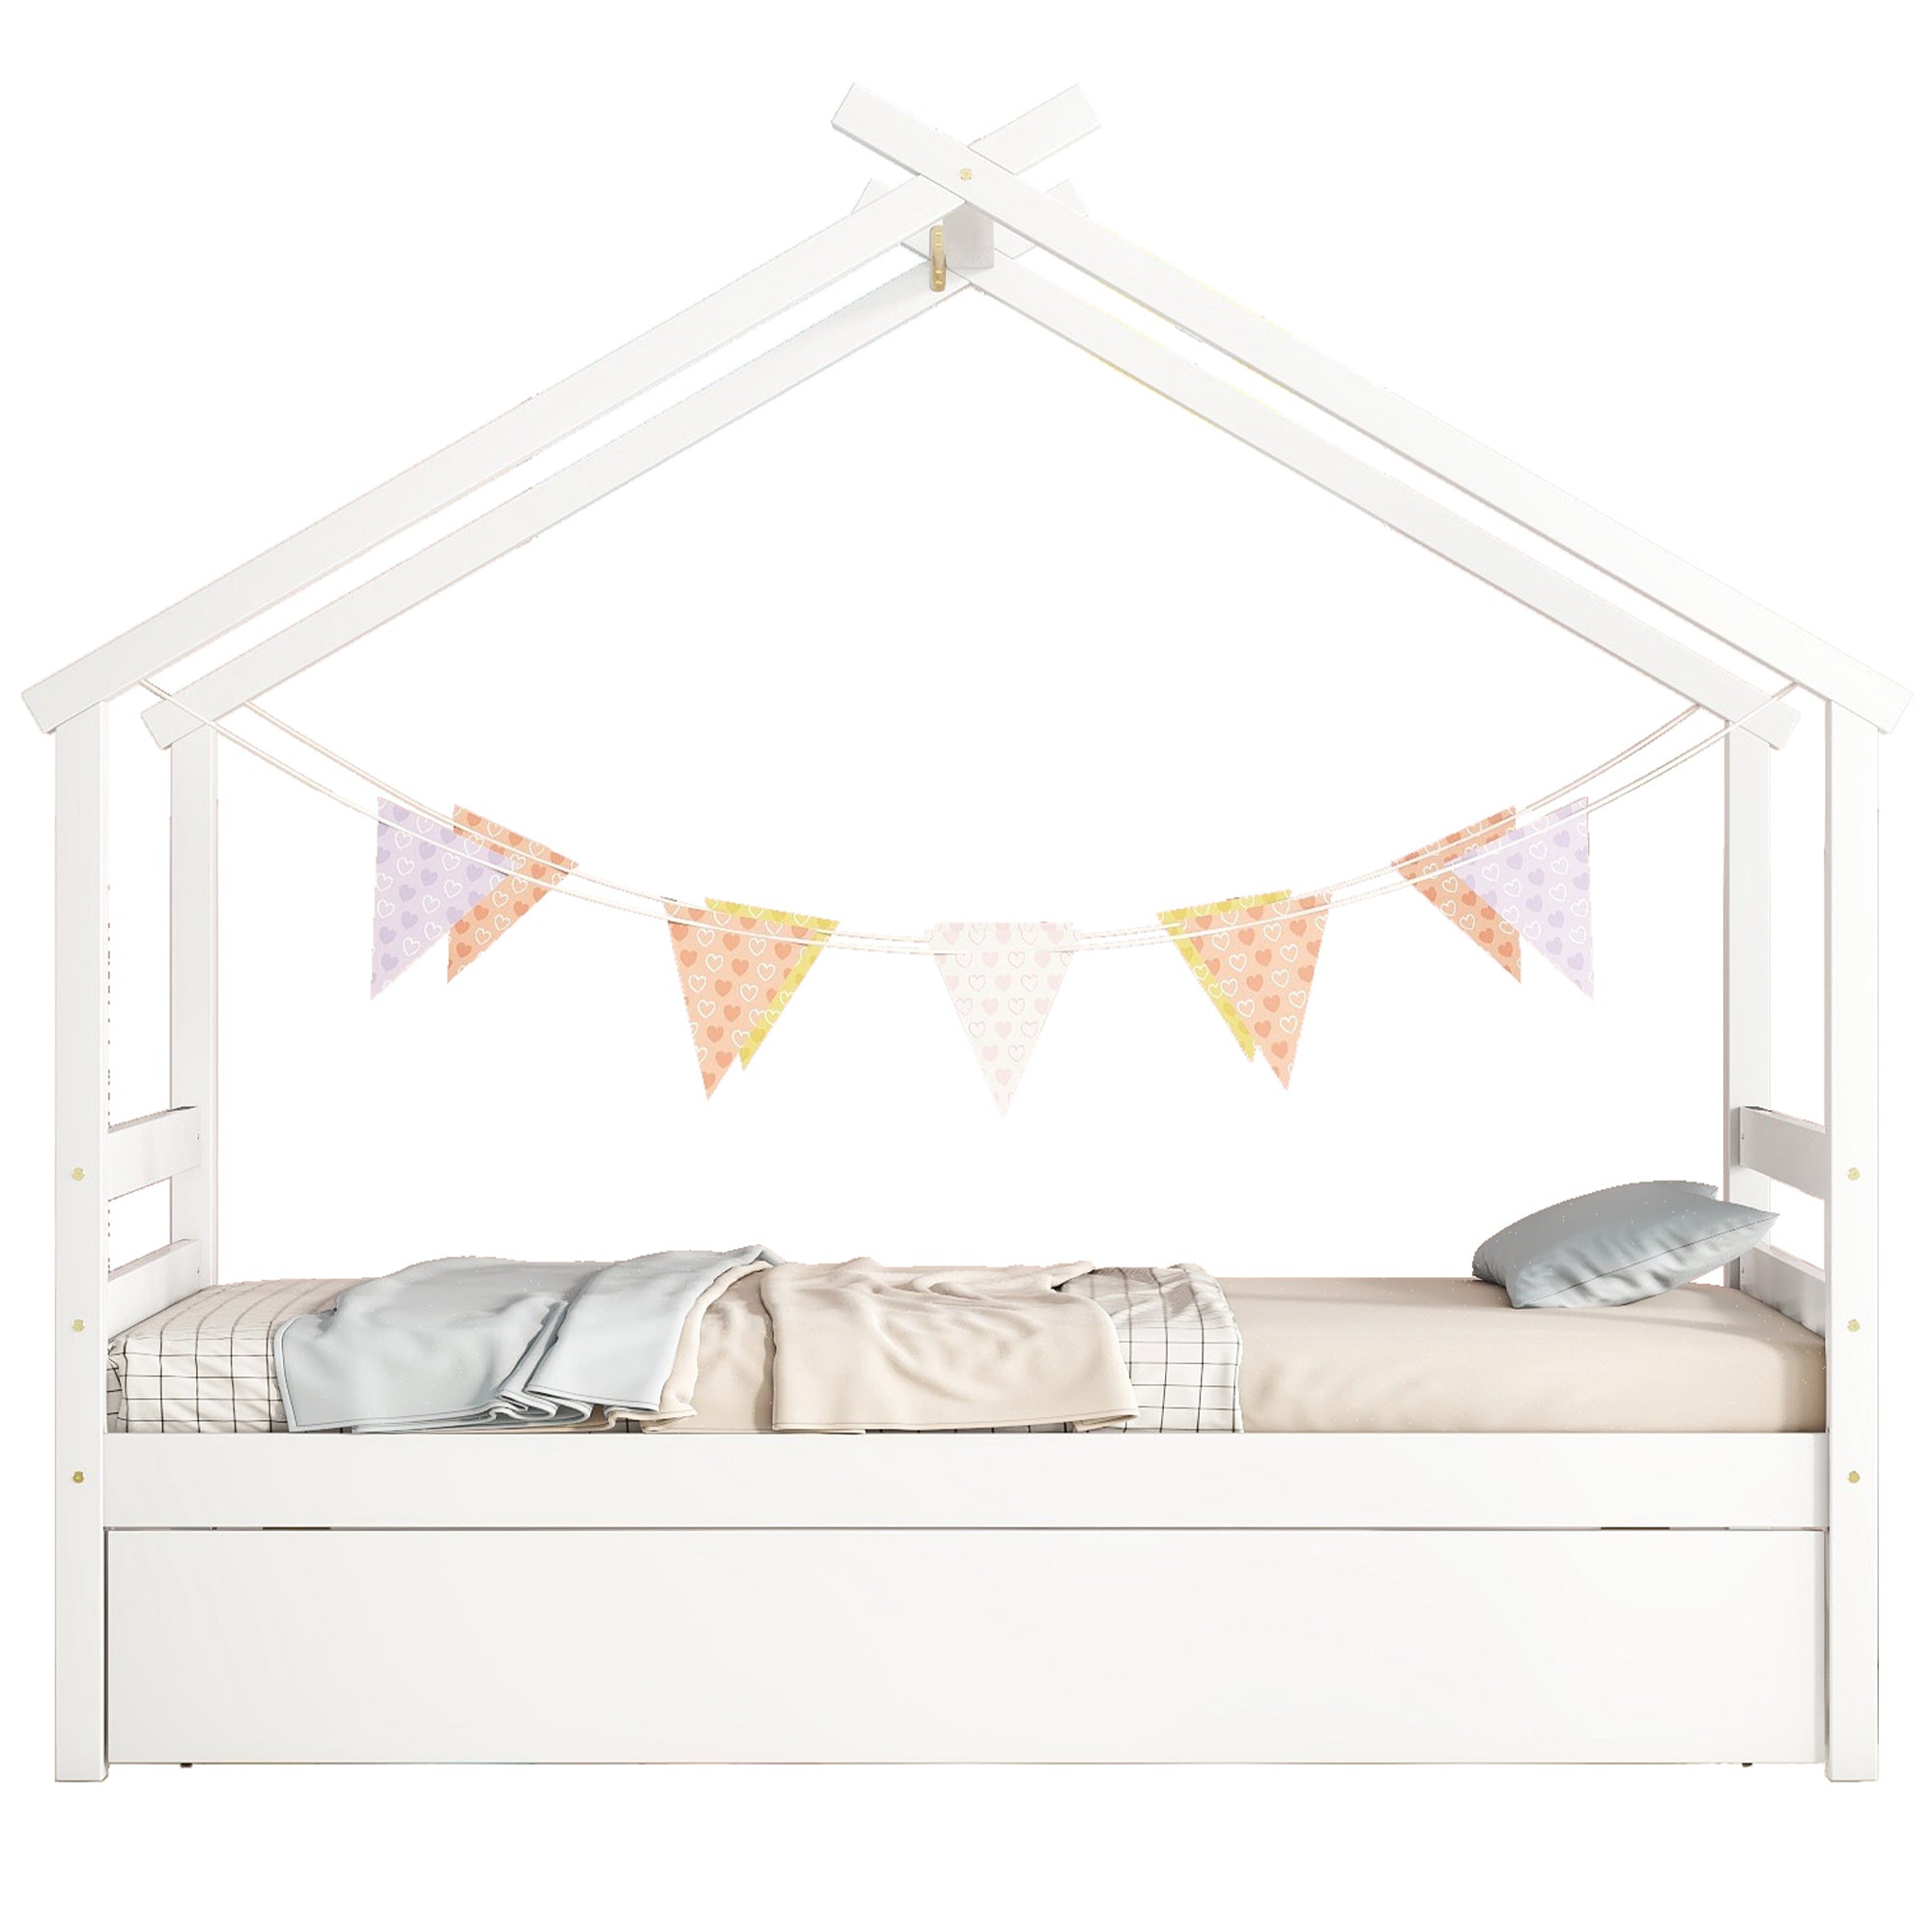 Bellemave Twin Size House-shaped Bed with Trundle Bellemave